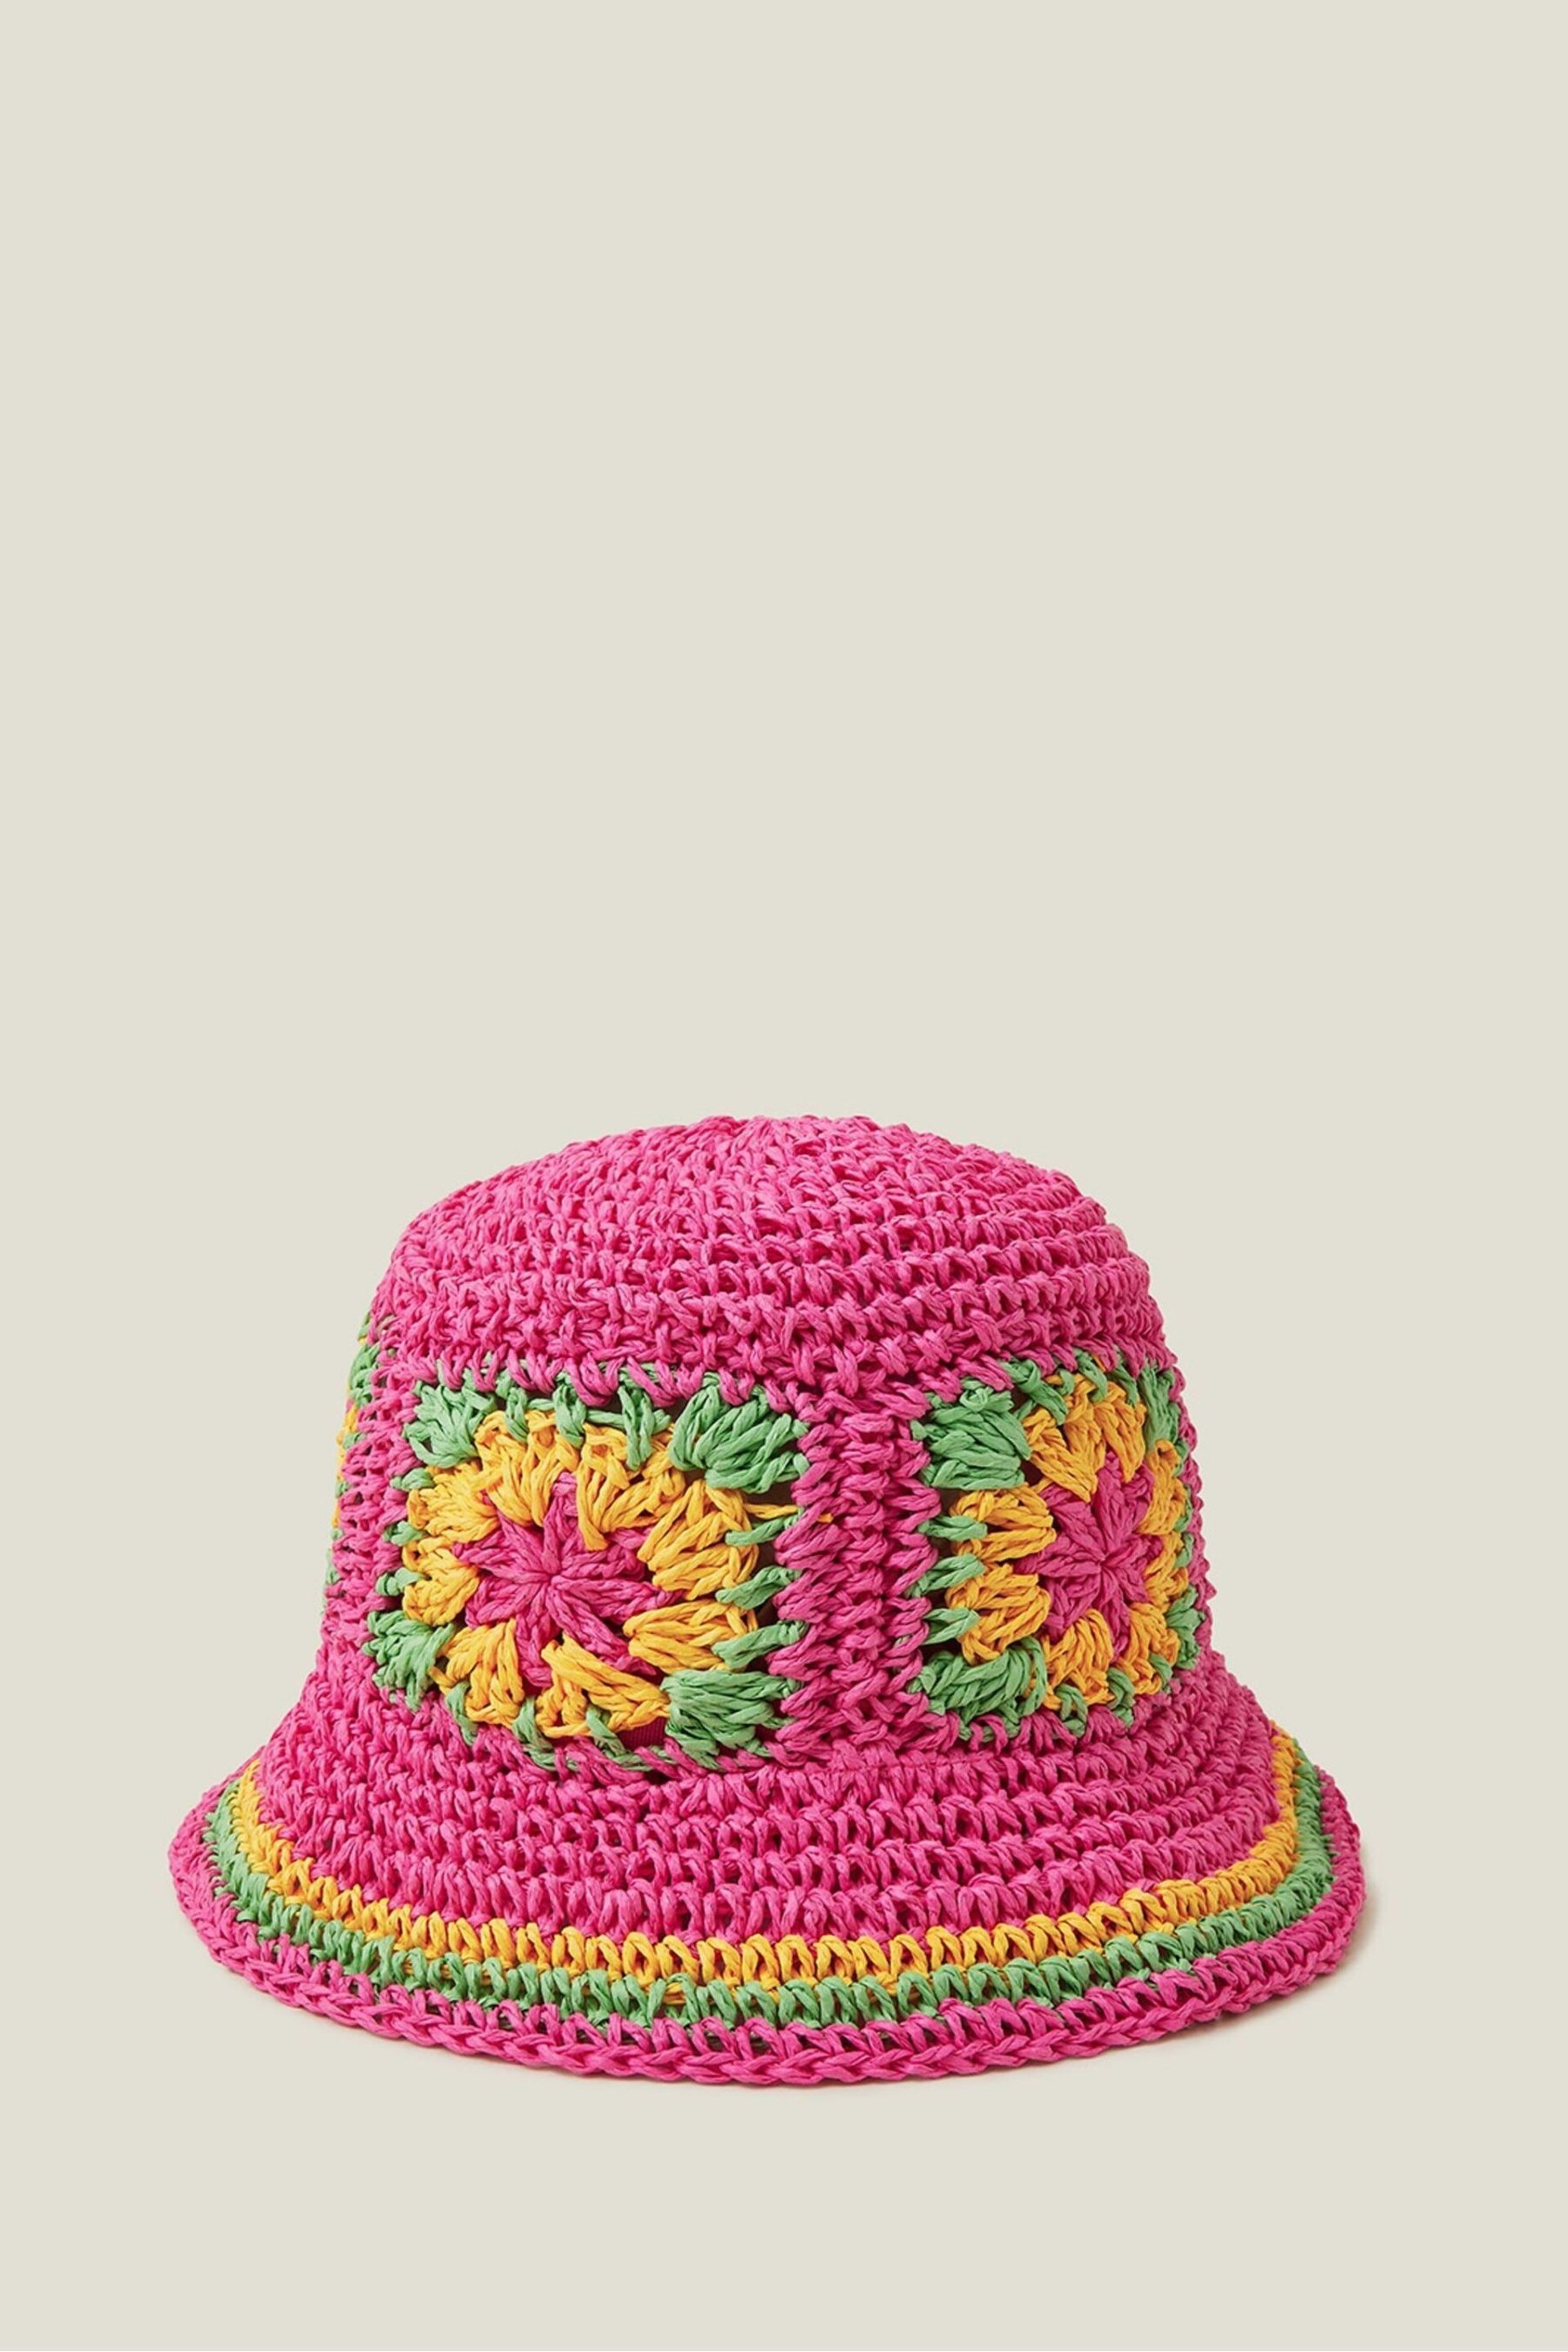 Angels By Accessorize Girls Pink Crochet Packable Hat - Image 2 of 3